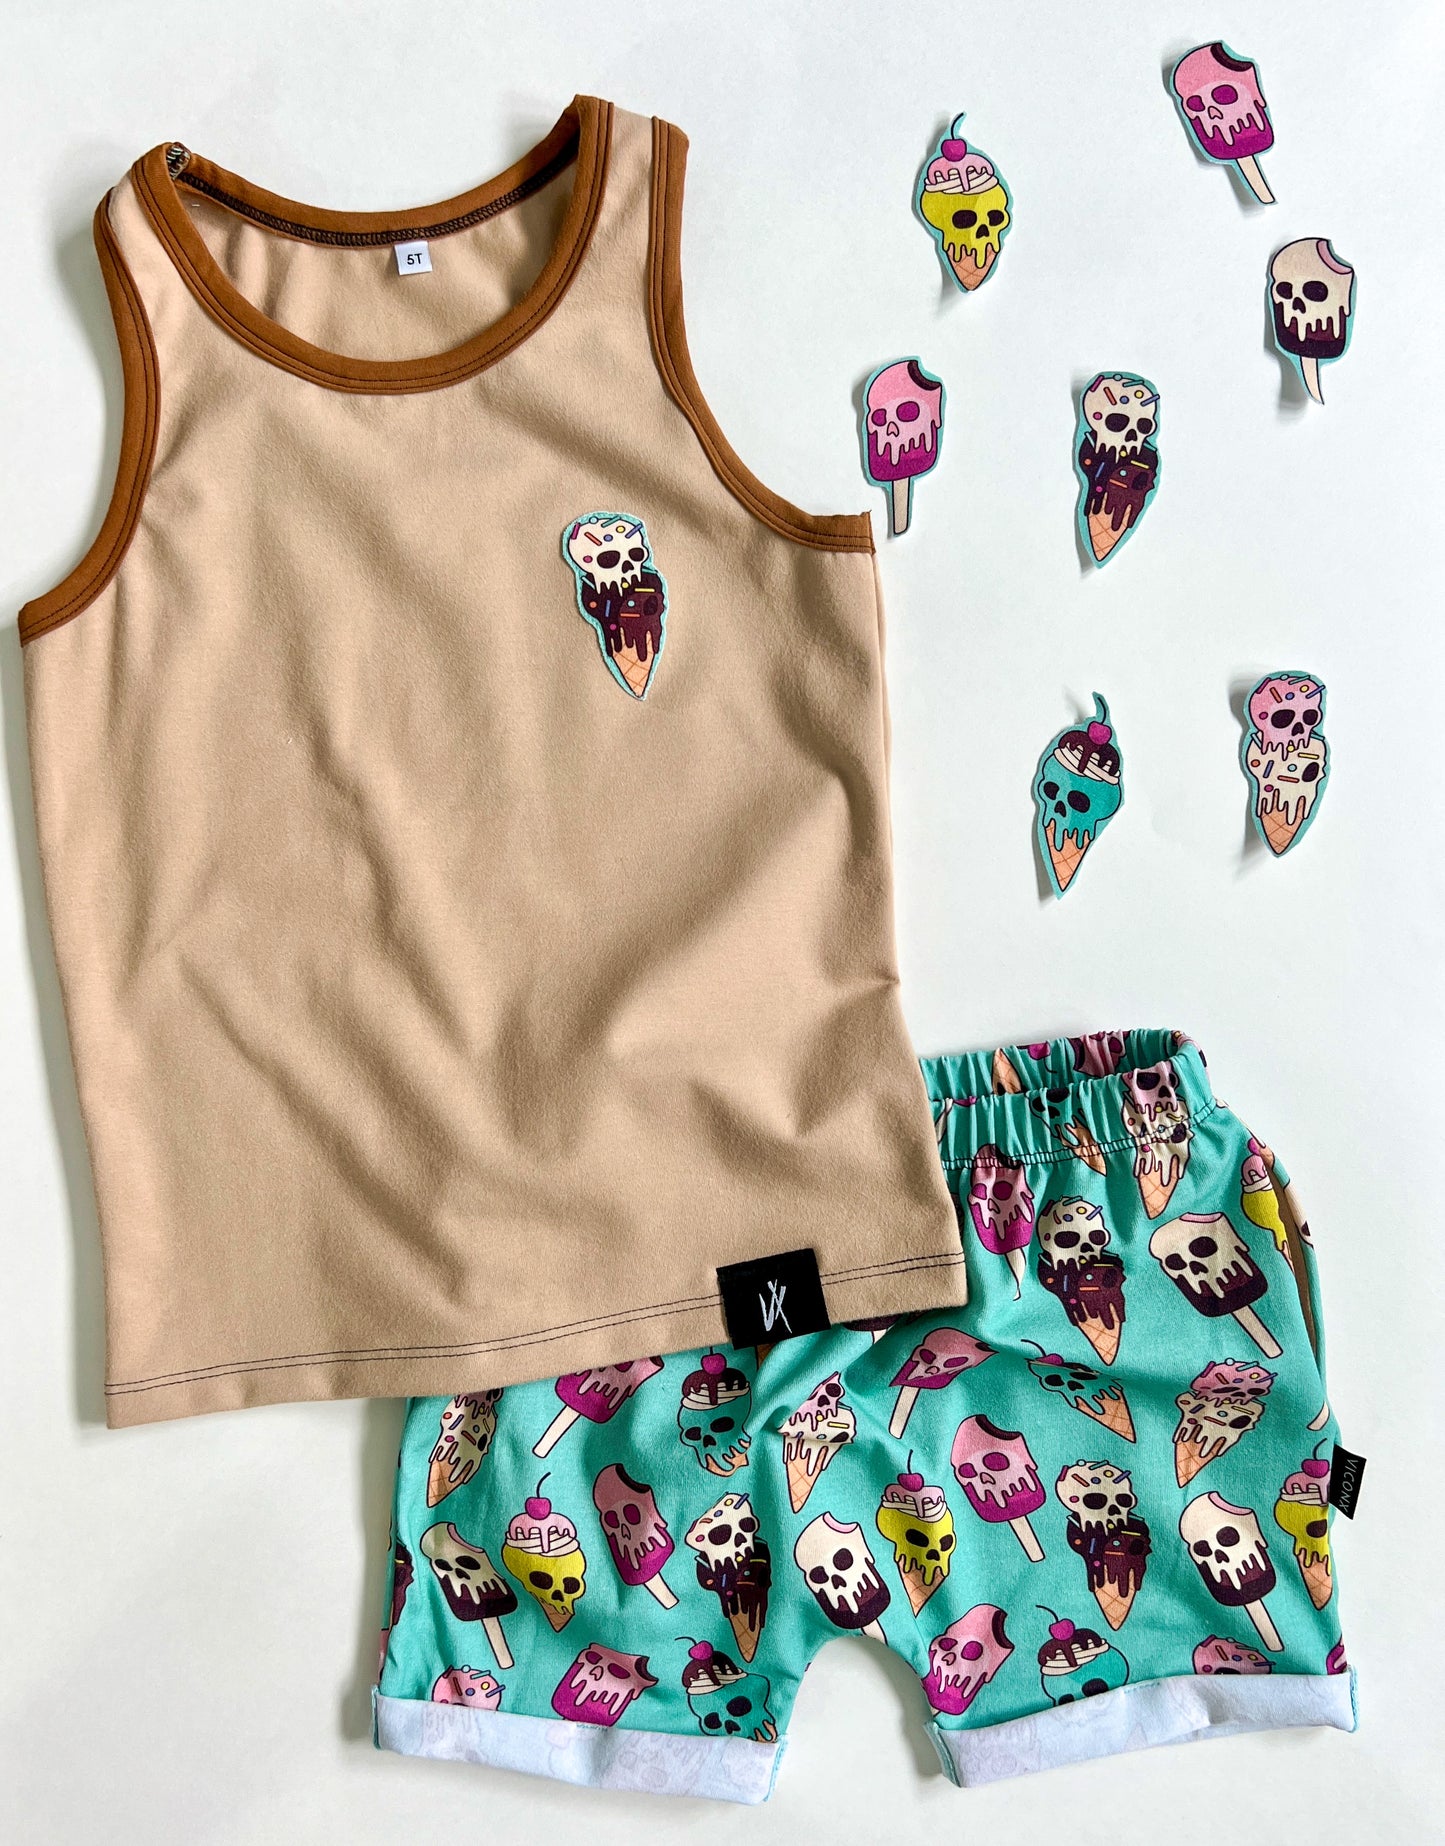 Skully Ice Cream Racer Back Tank - various style applique